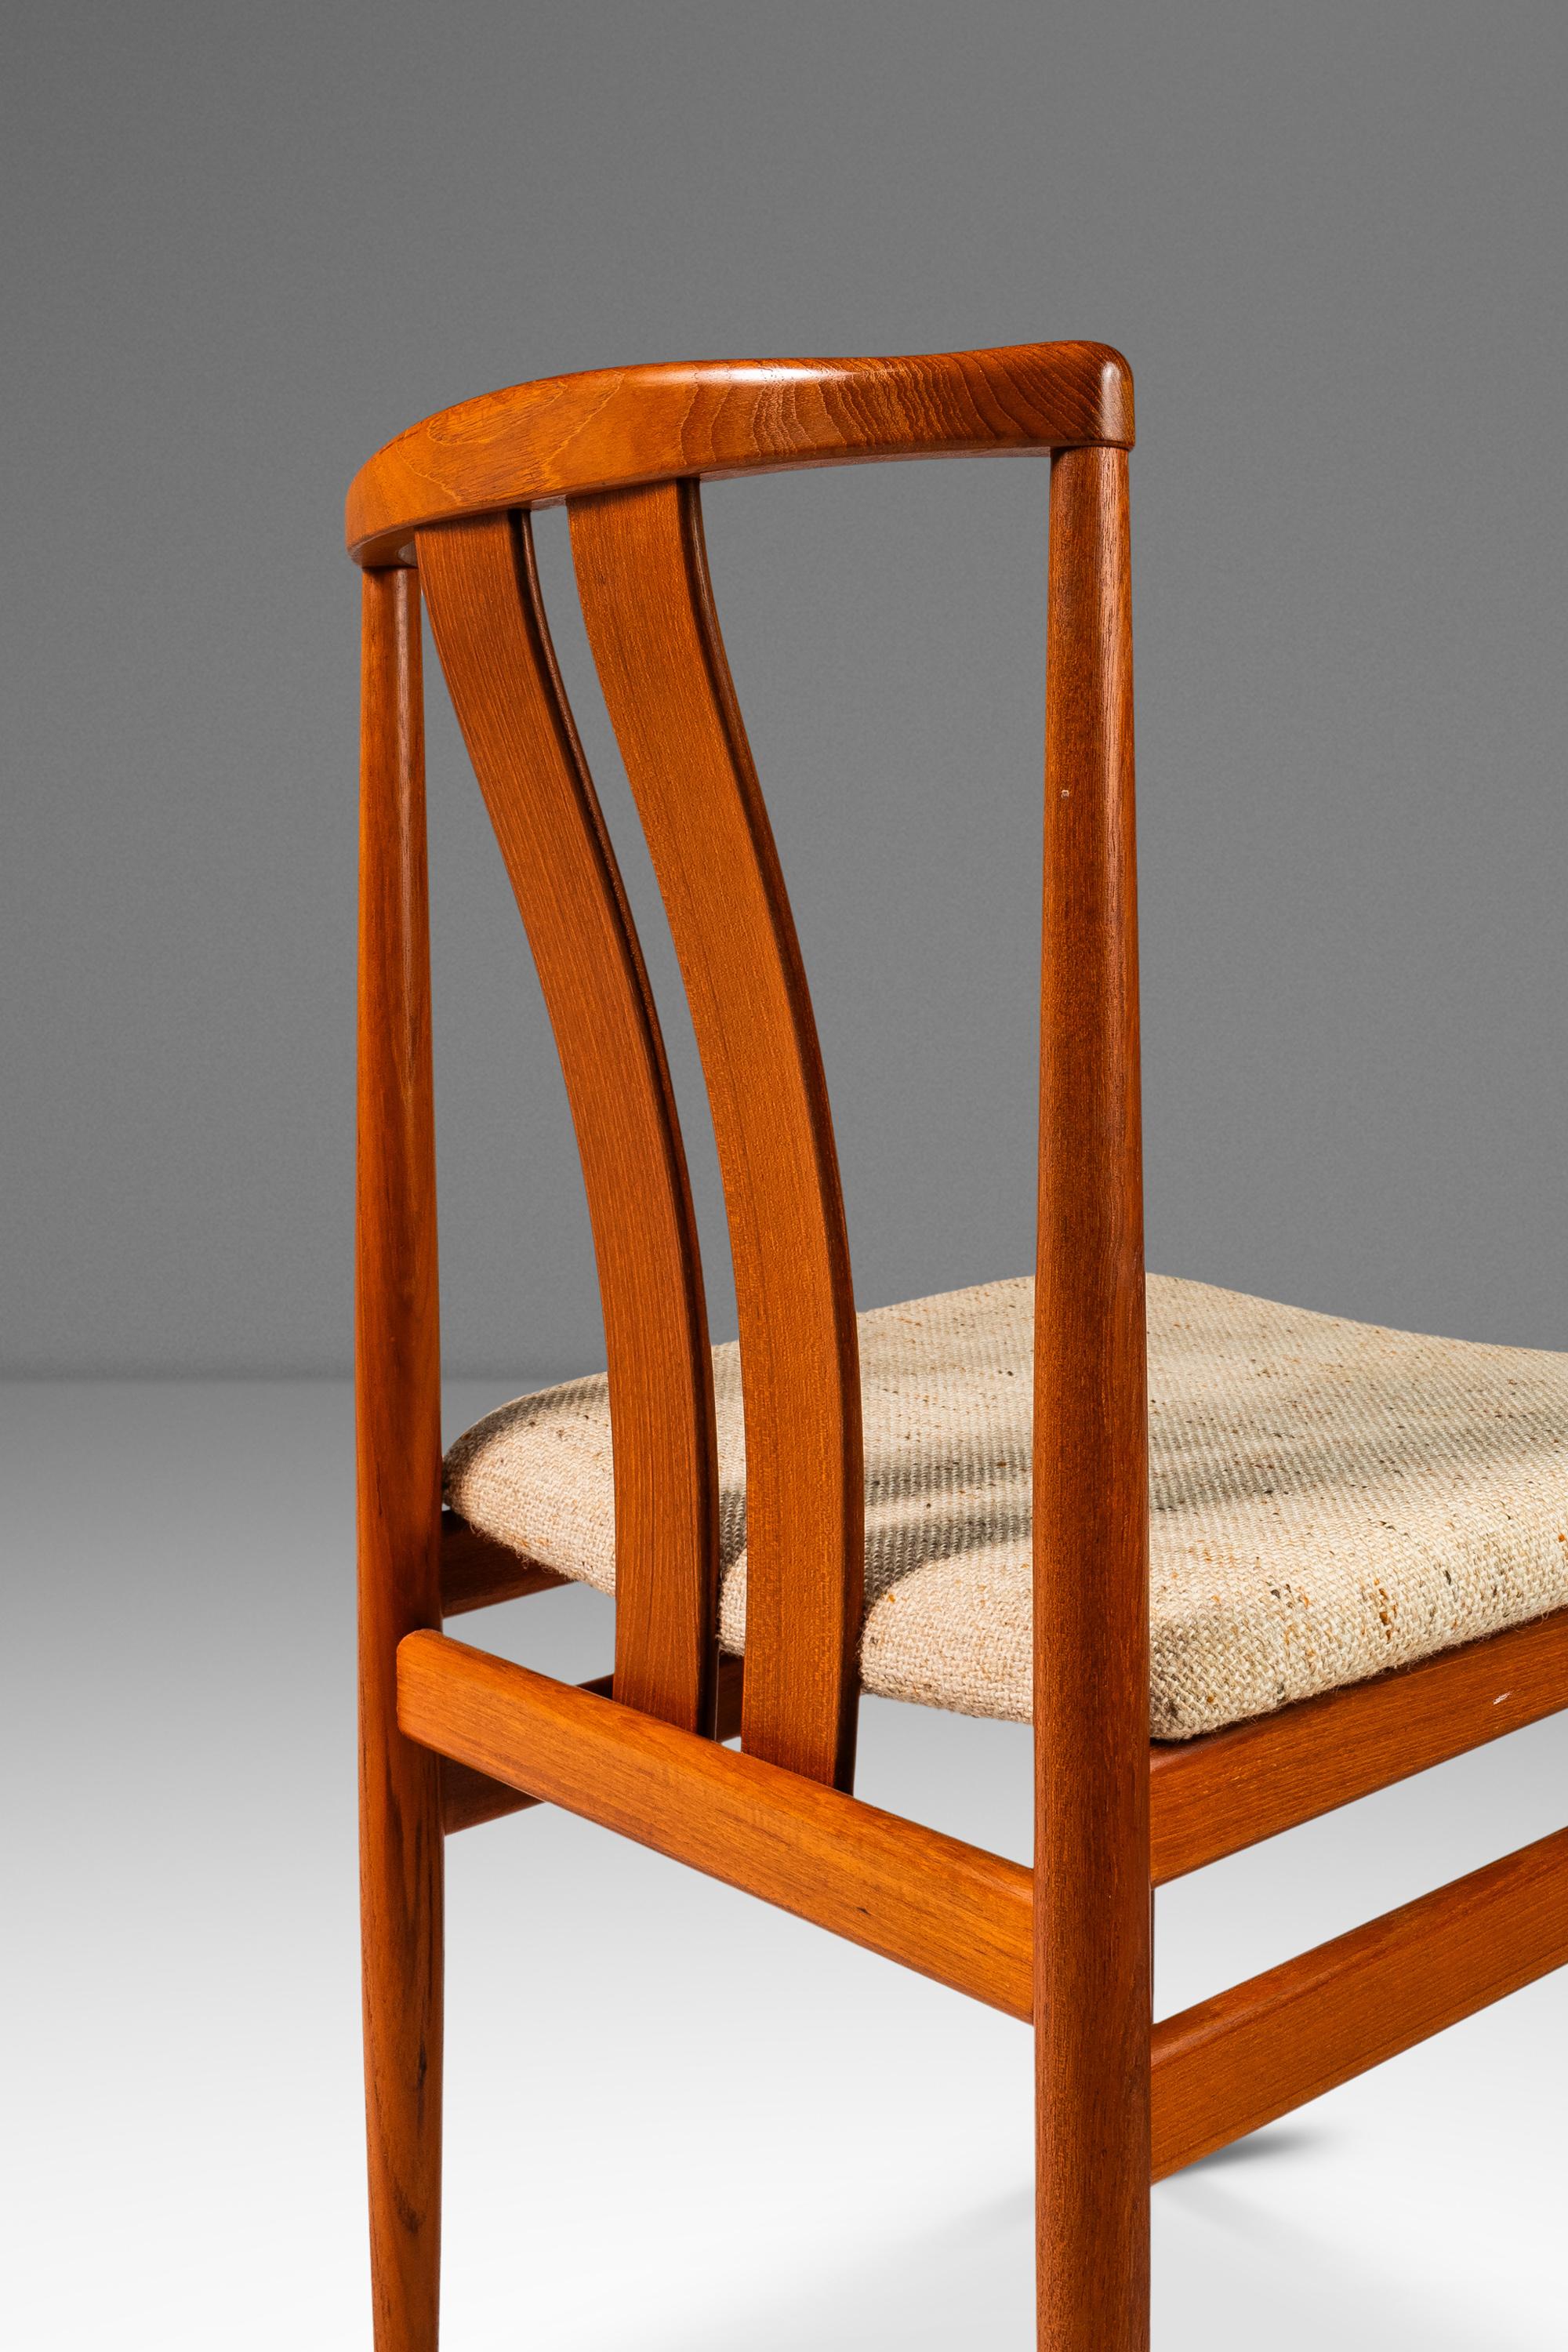 Set of 4 Dining Chairs, Teak & Oatmeal Knit Fabric by Vamdrup Stolefabrik, 1960s For Sale 1